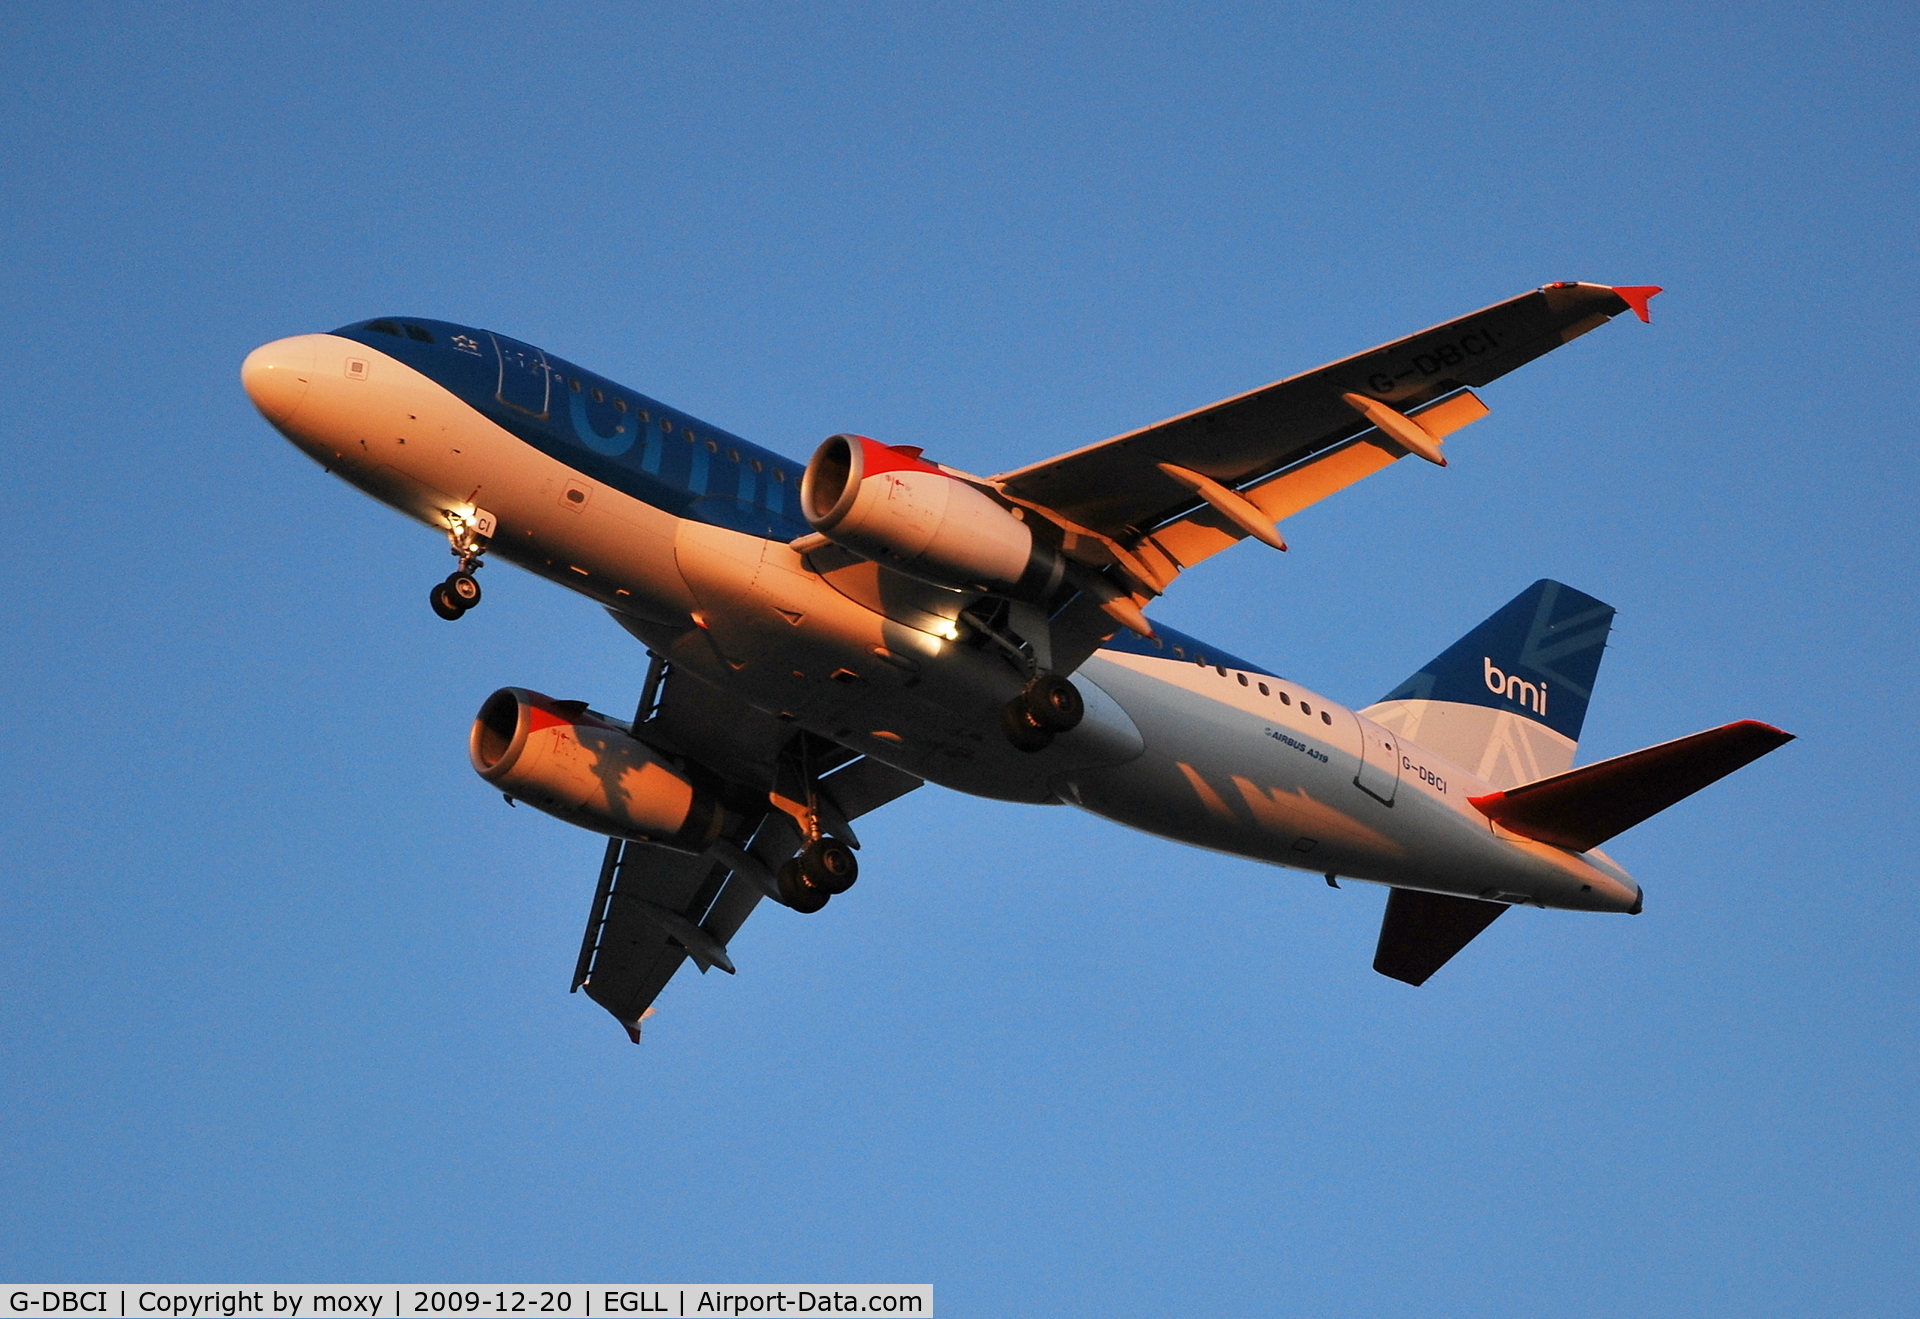 G-DBCI, 2006 Airbus A319-131 C/N 2720, Finals with lights on nearly dusk at Heathrow